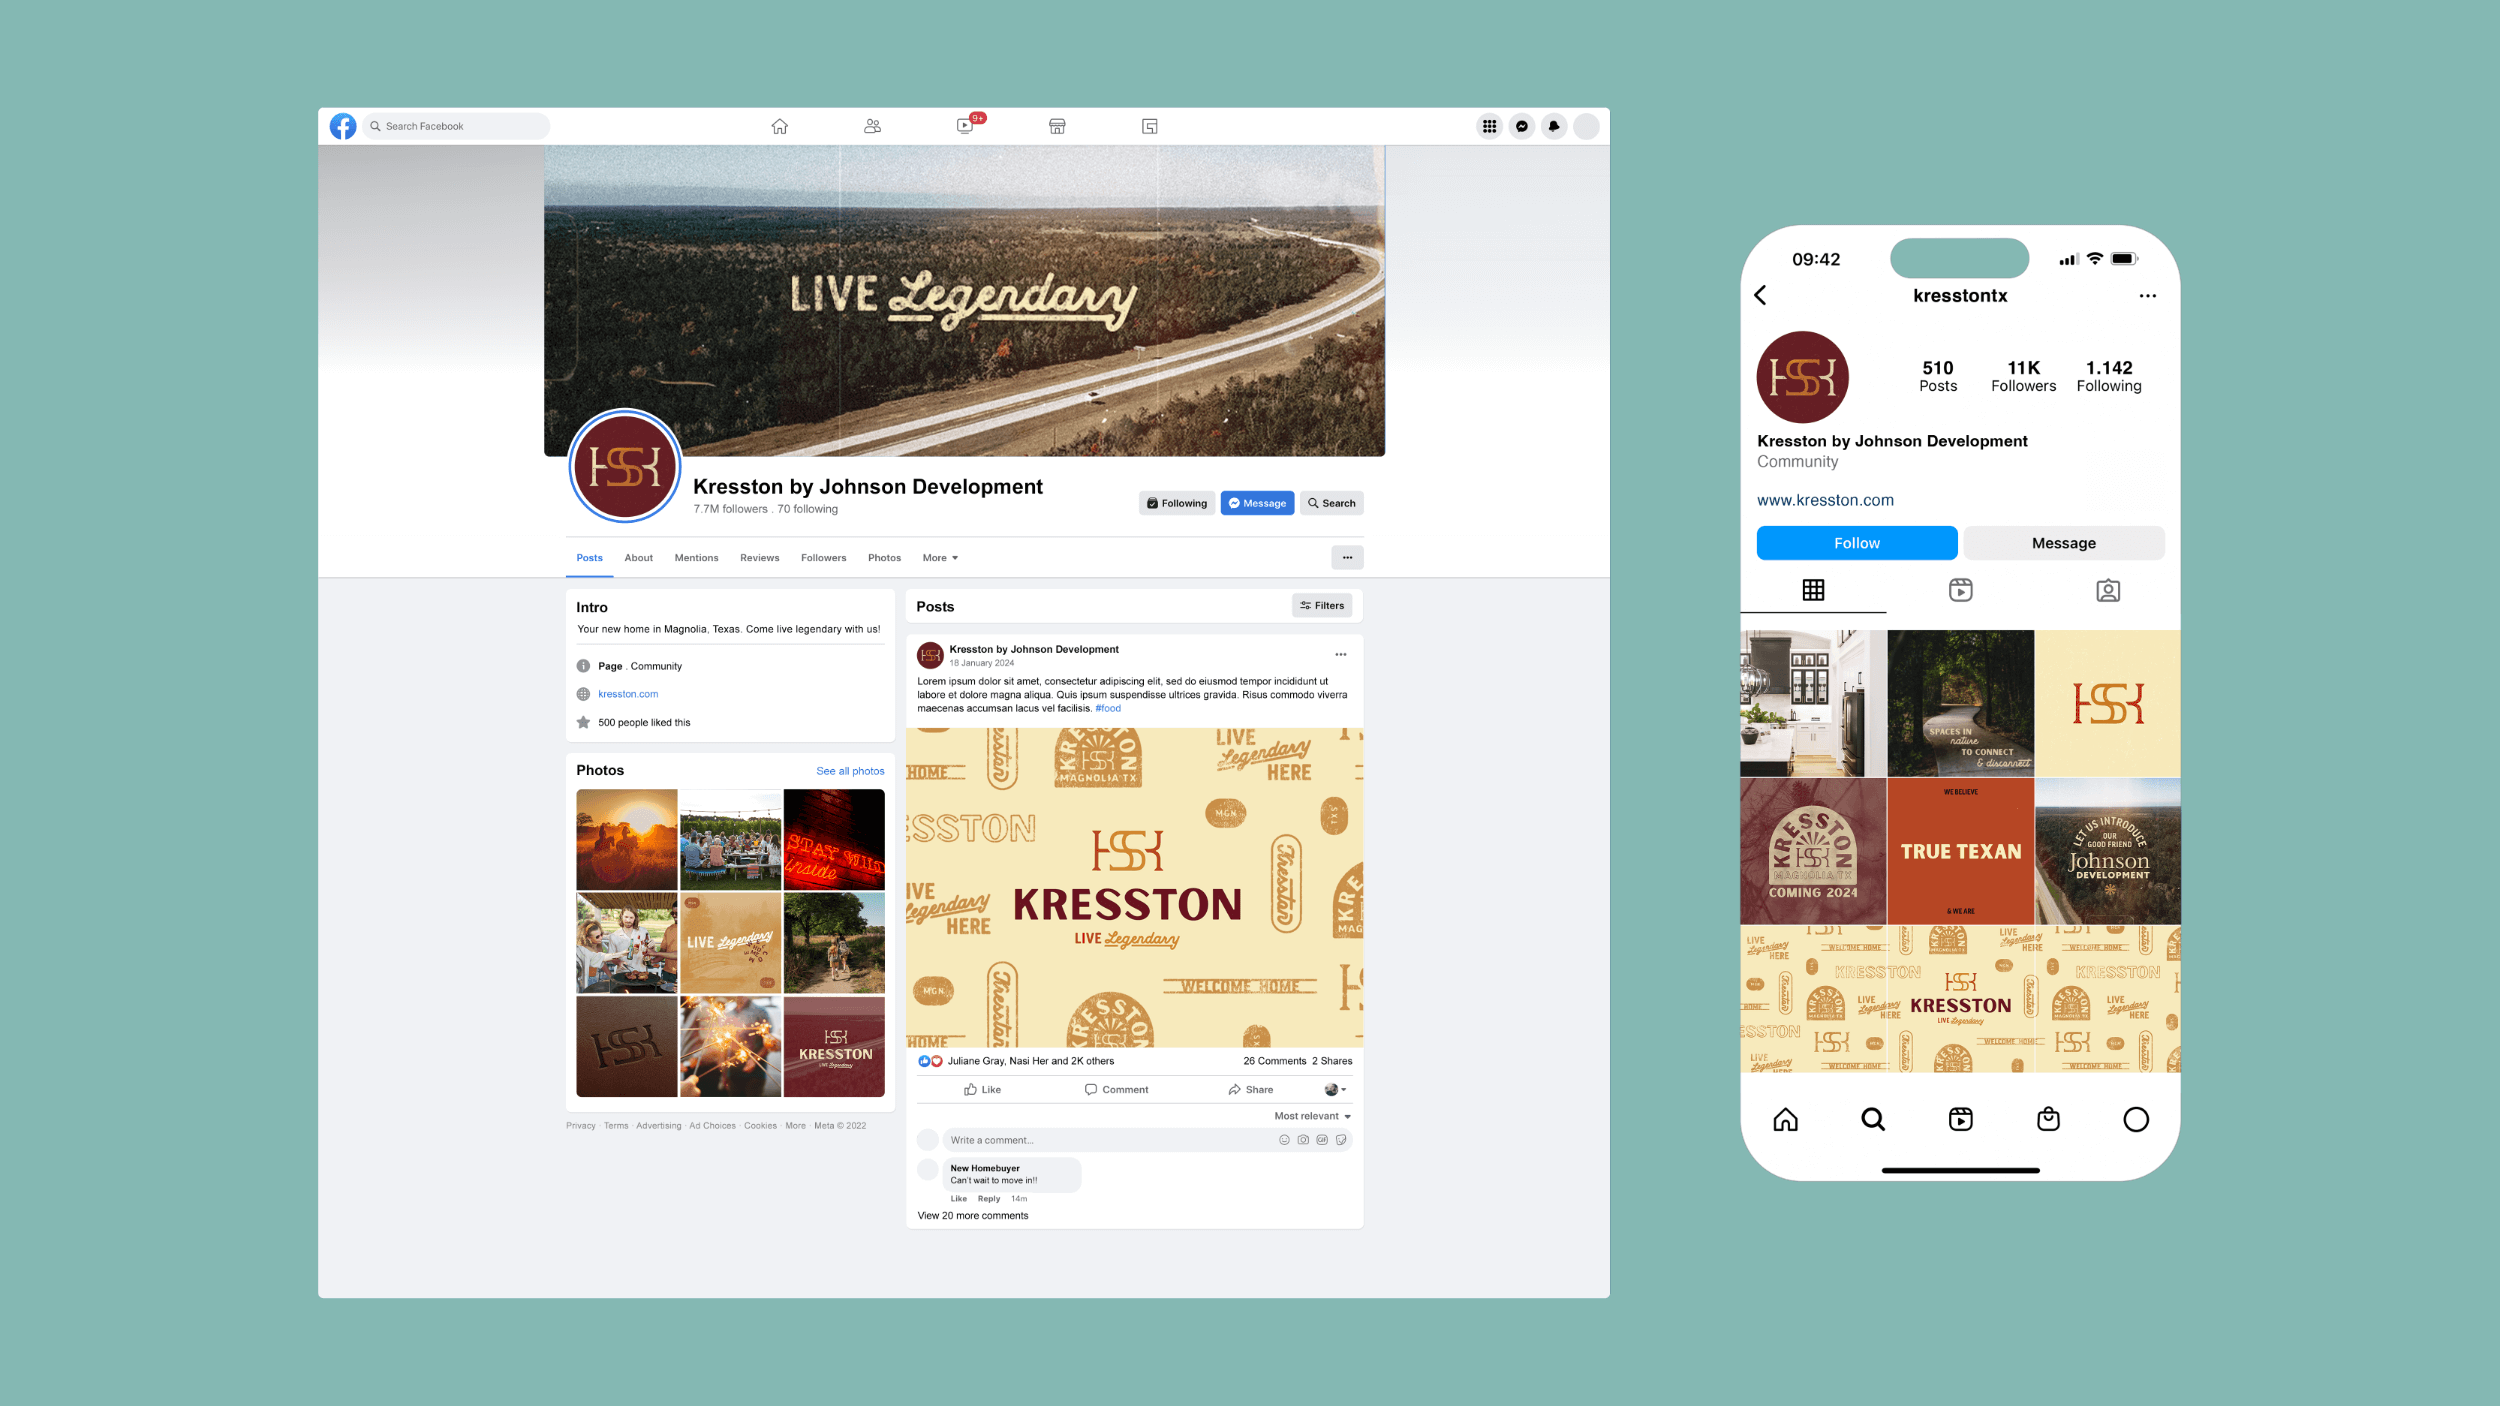 Mockups showing examples of social media profiles for Kresston. On the left sits a desktop view of a facebook profile, on the right is a mobile view of showing instagram posts for Kresston.